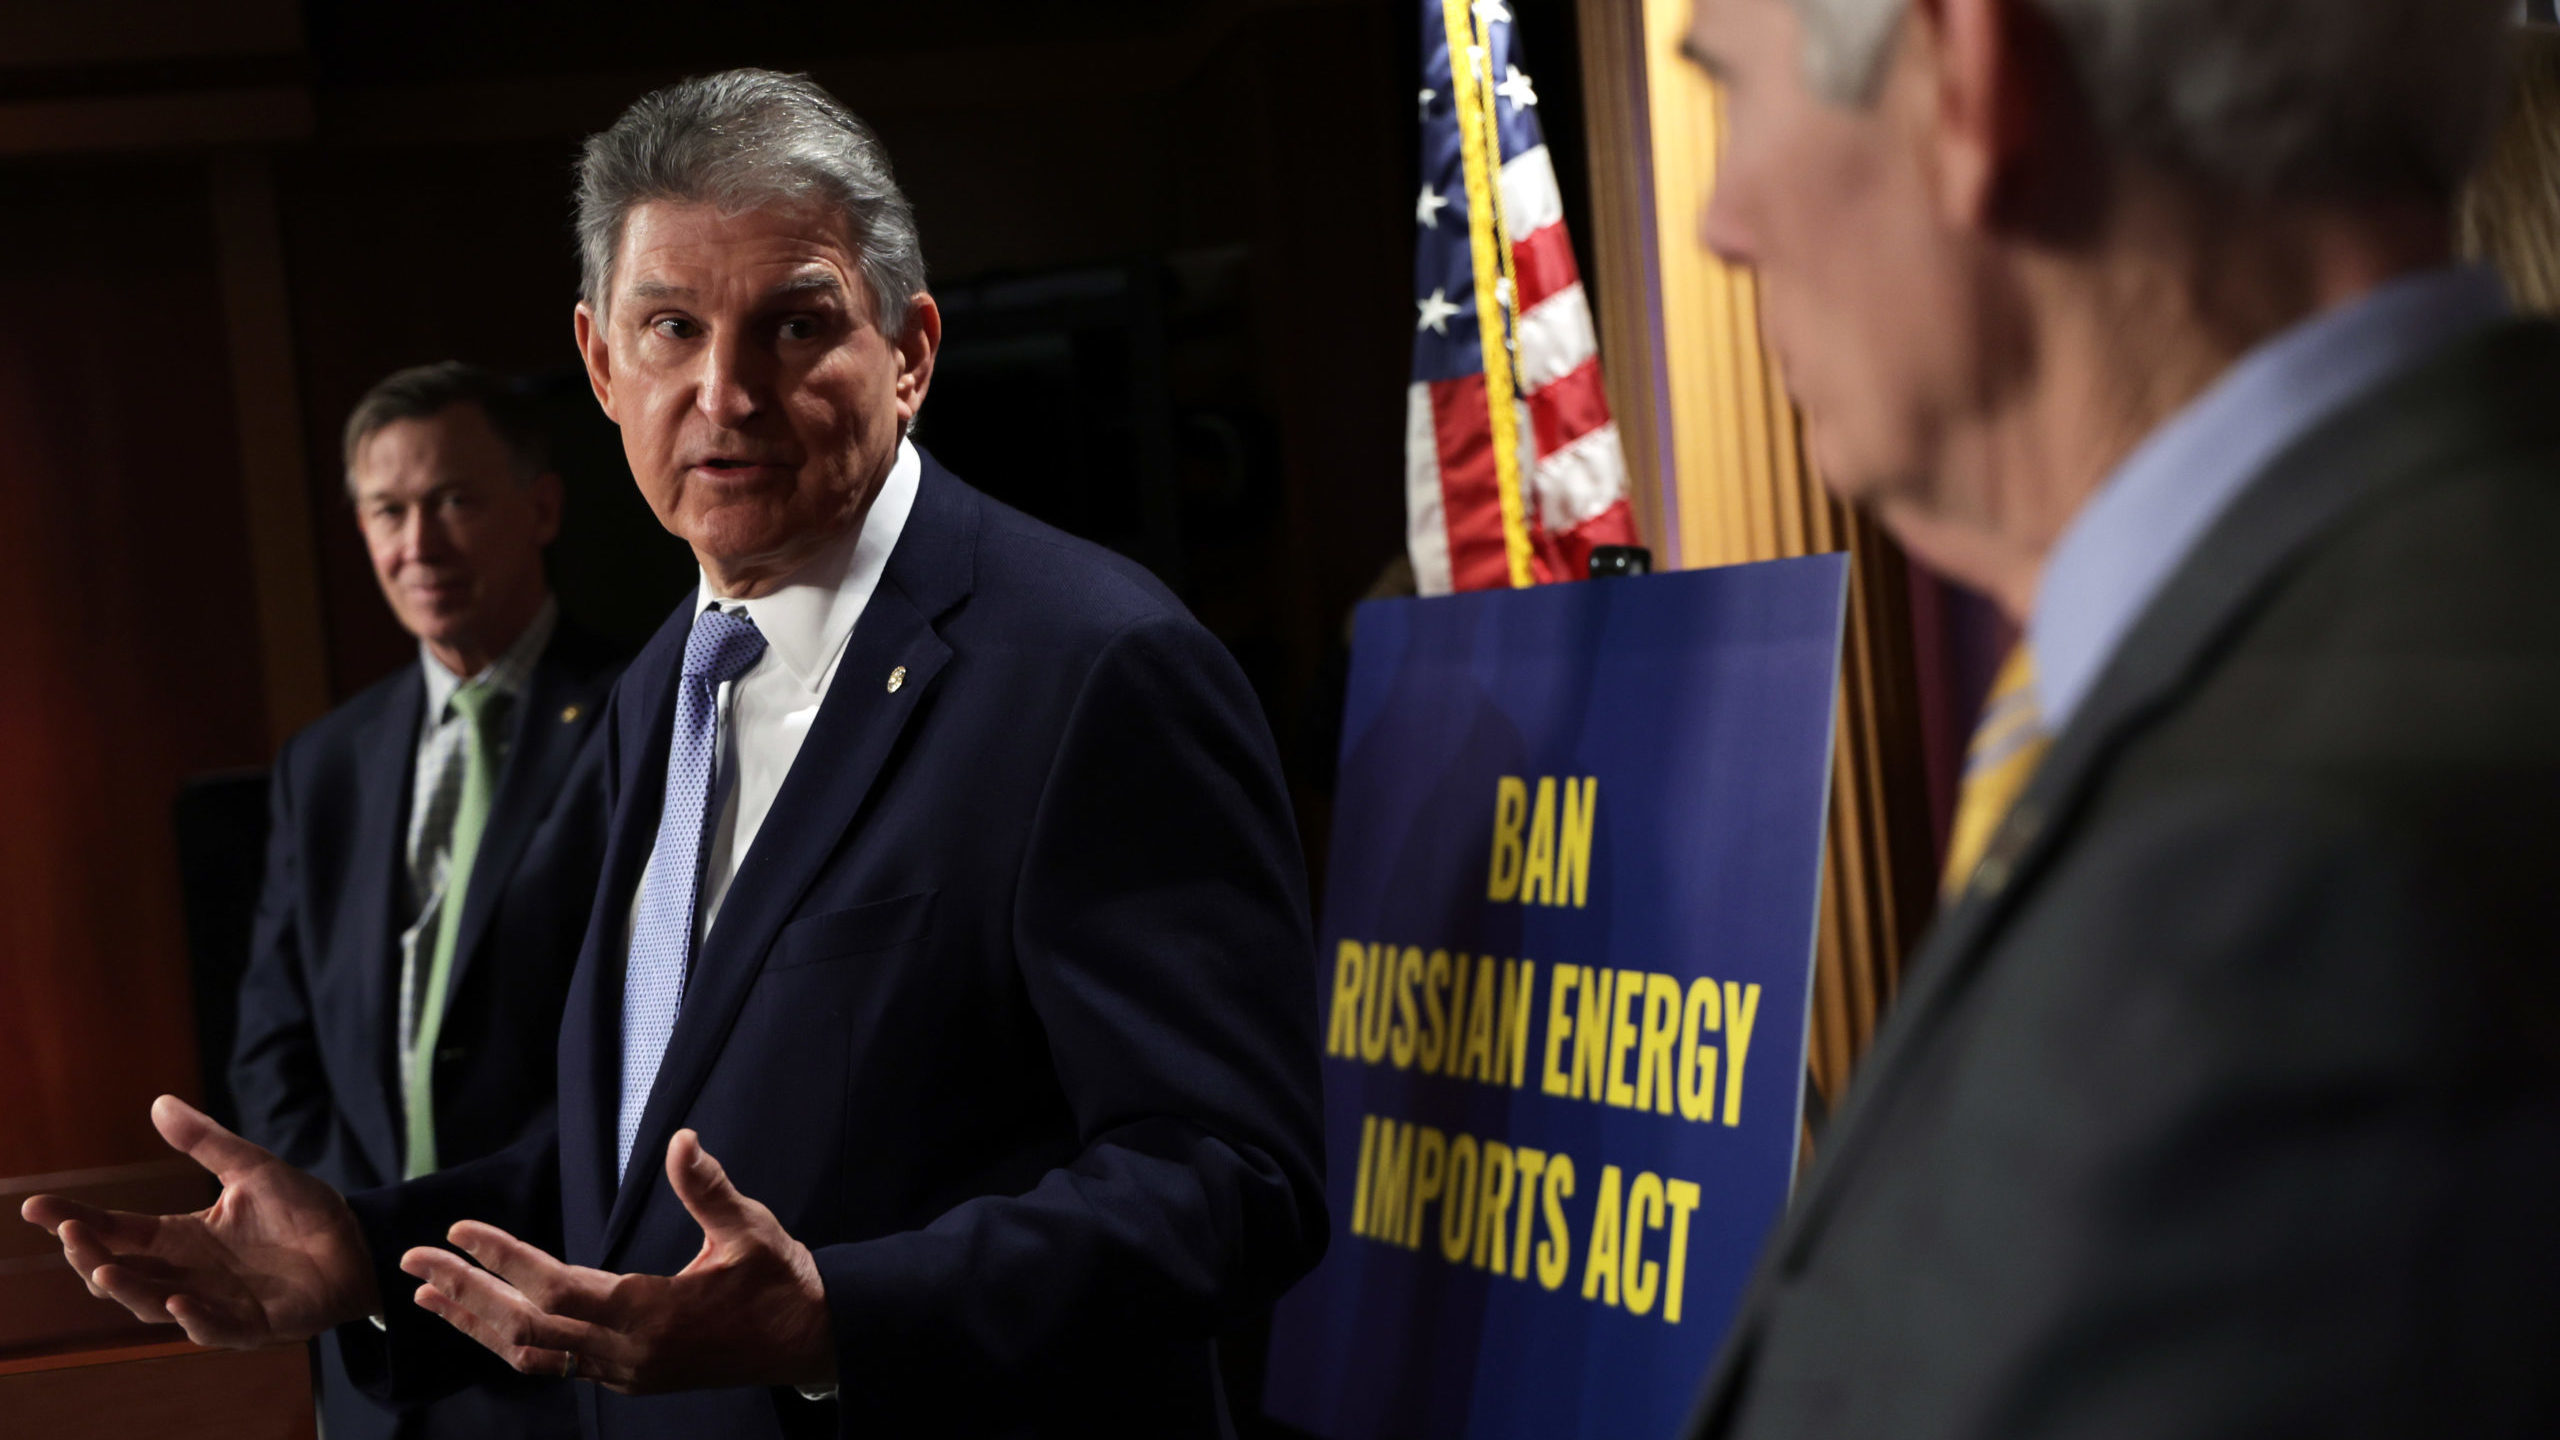 U.S. Sen. Joe Manchin (D-WV) speaks during a news conference at the U.S. Capitol March 3, 2022 in Washington, DC. Getty Images photo